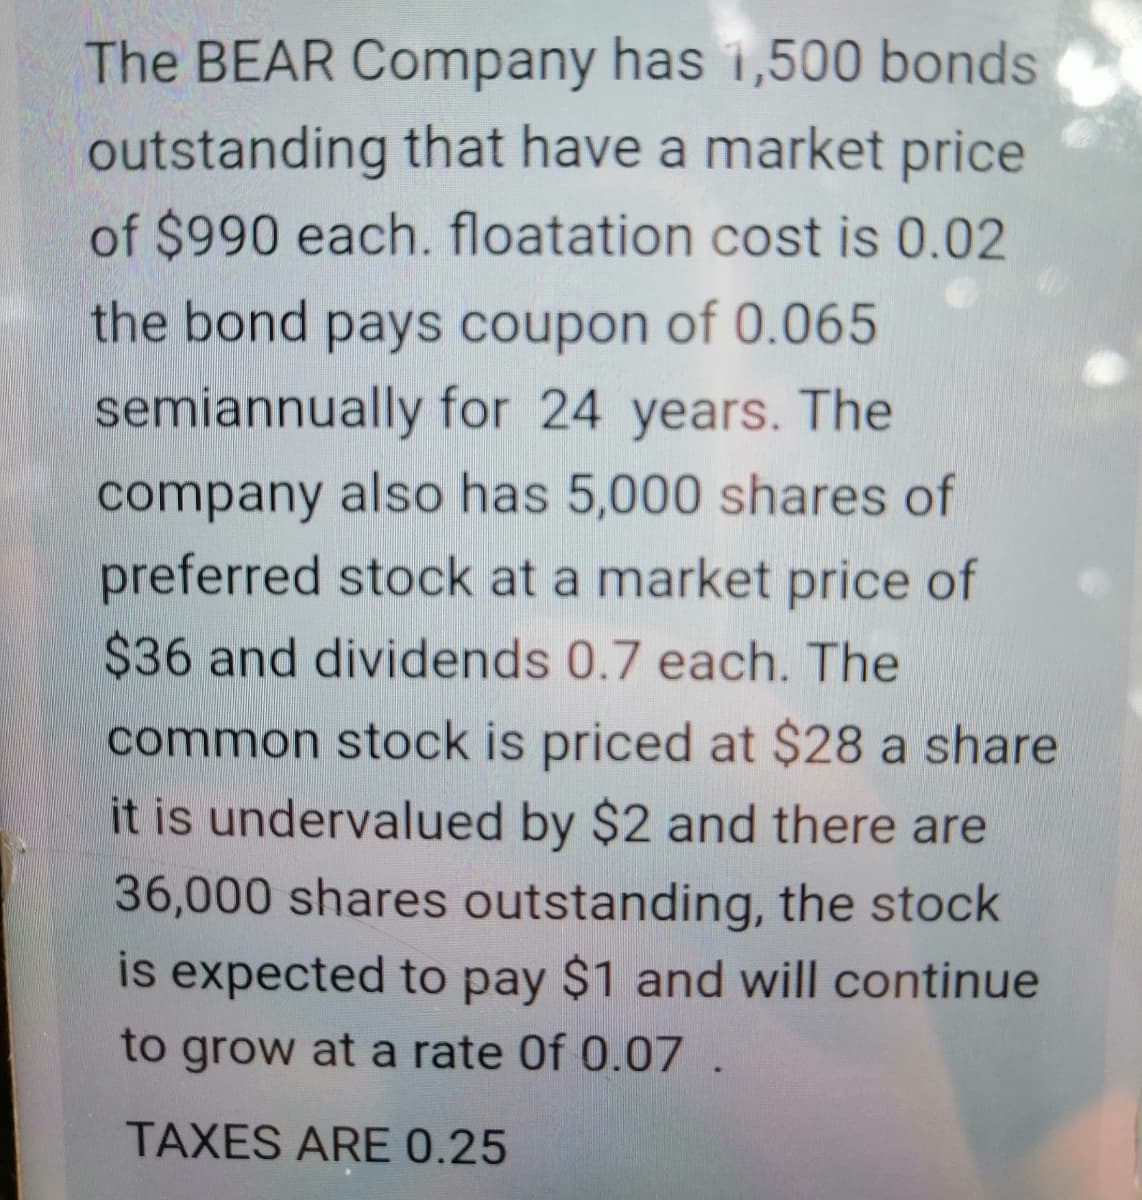 The BEAR Company has 1,500 bonds
outstanding that have a market price
of $990 each. floatation cost is 0.02
the bond pays coupon of 0.065
semiannually for 24 years. The
company also has 5,000 shares of
preferred stock at a market price of
$36 and dividends 0.7 each. The
common stock is priced at $28 a share
it is undervalued by $2 and there are
36,000 shares outstanding, the stock
is expected to pay $1 and will continue
to grow at a rate Of 0.07
TAXES ARE 0.25
